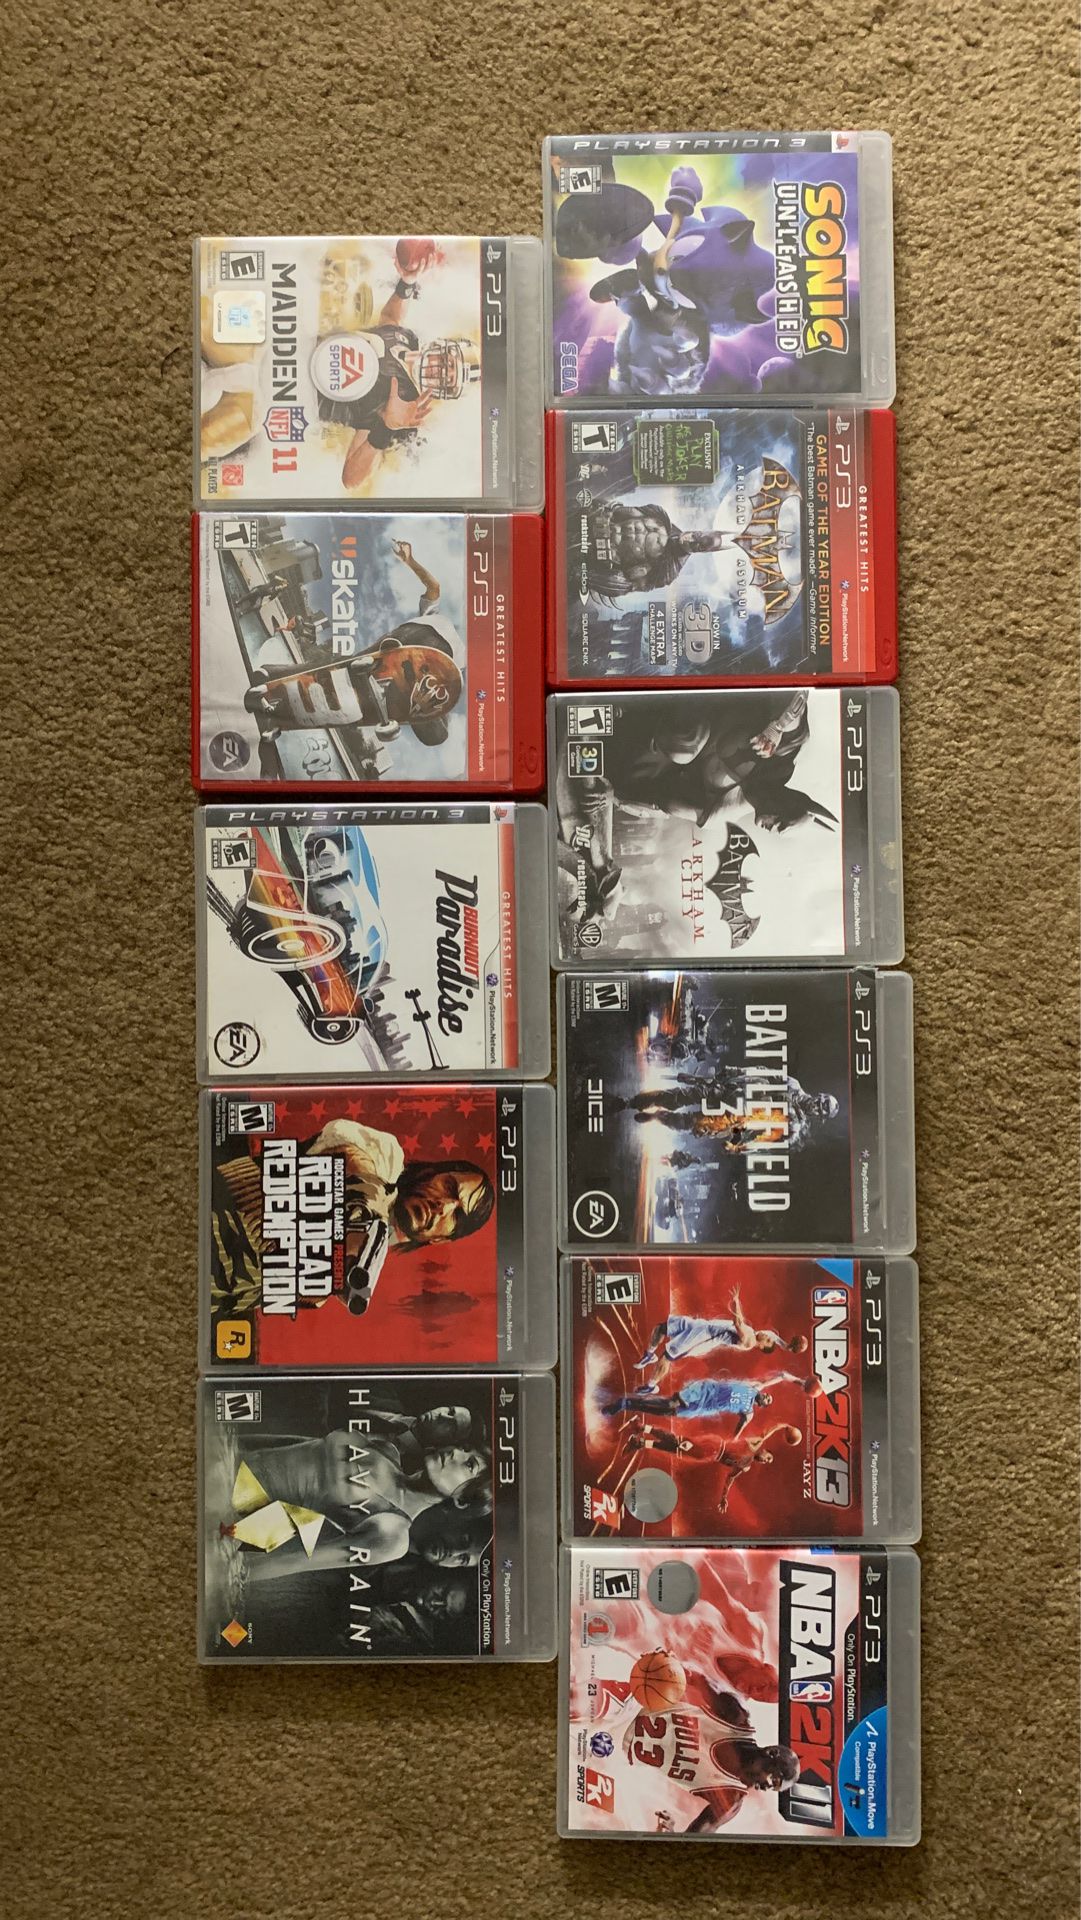 Ps3 games each different prices $2 max $10